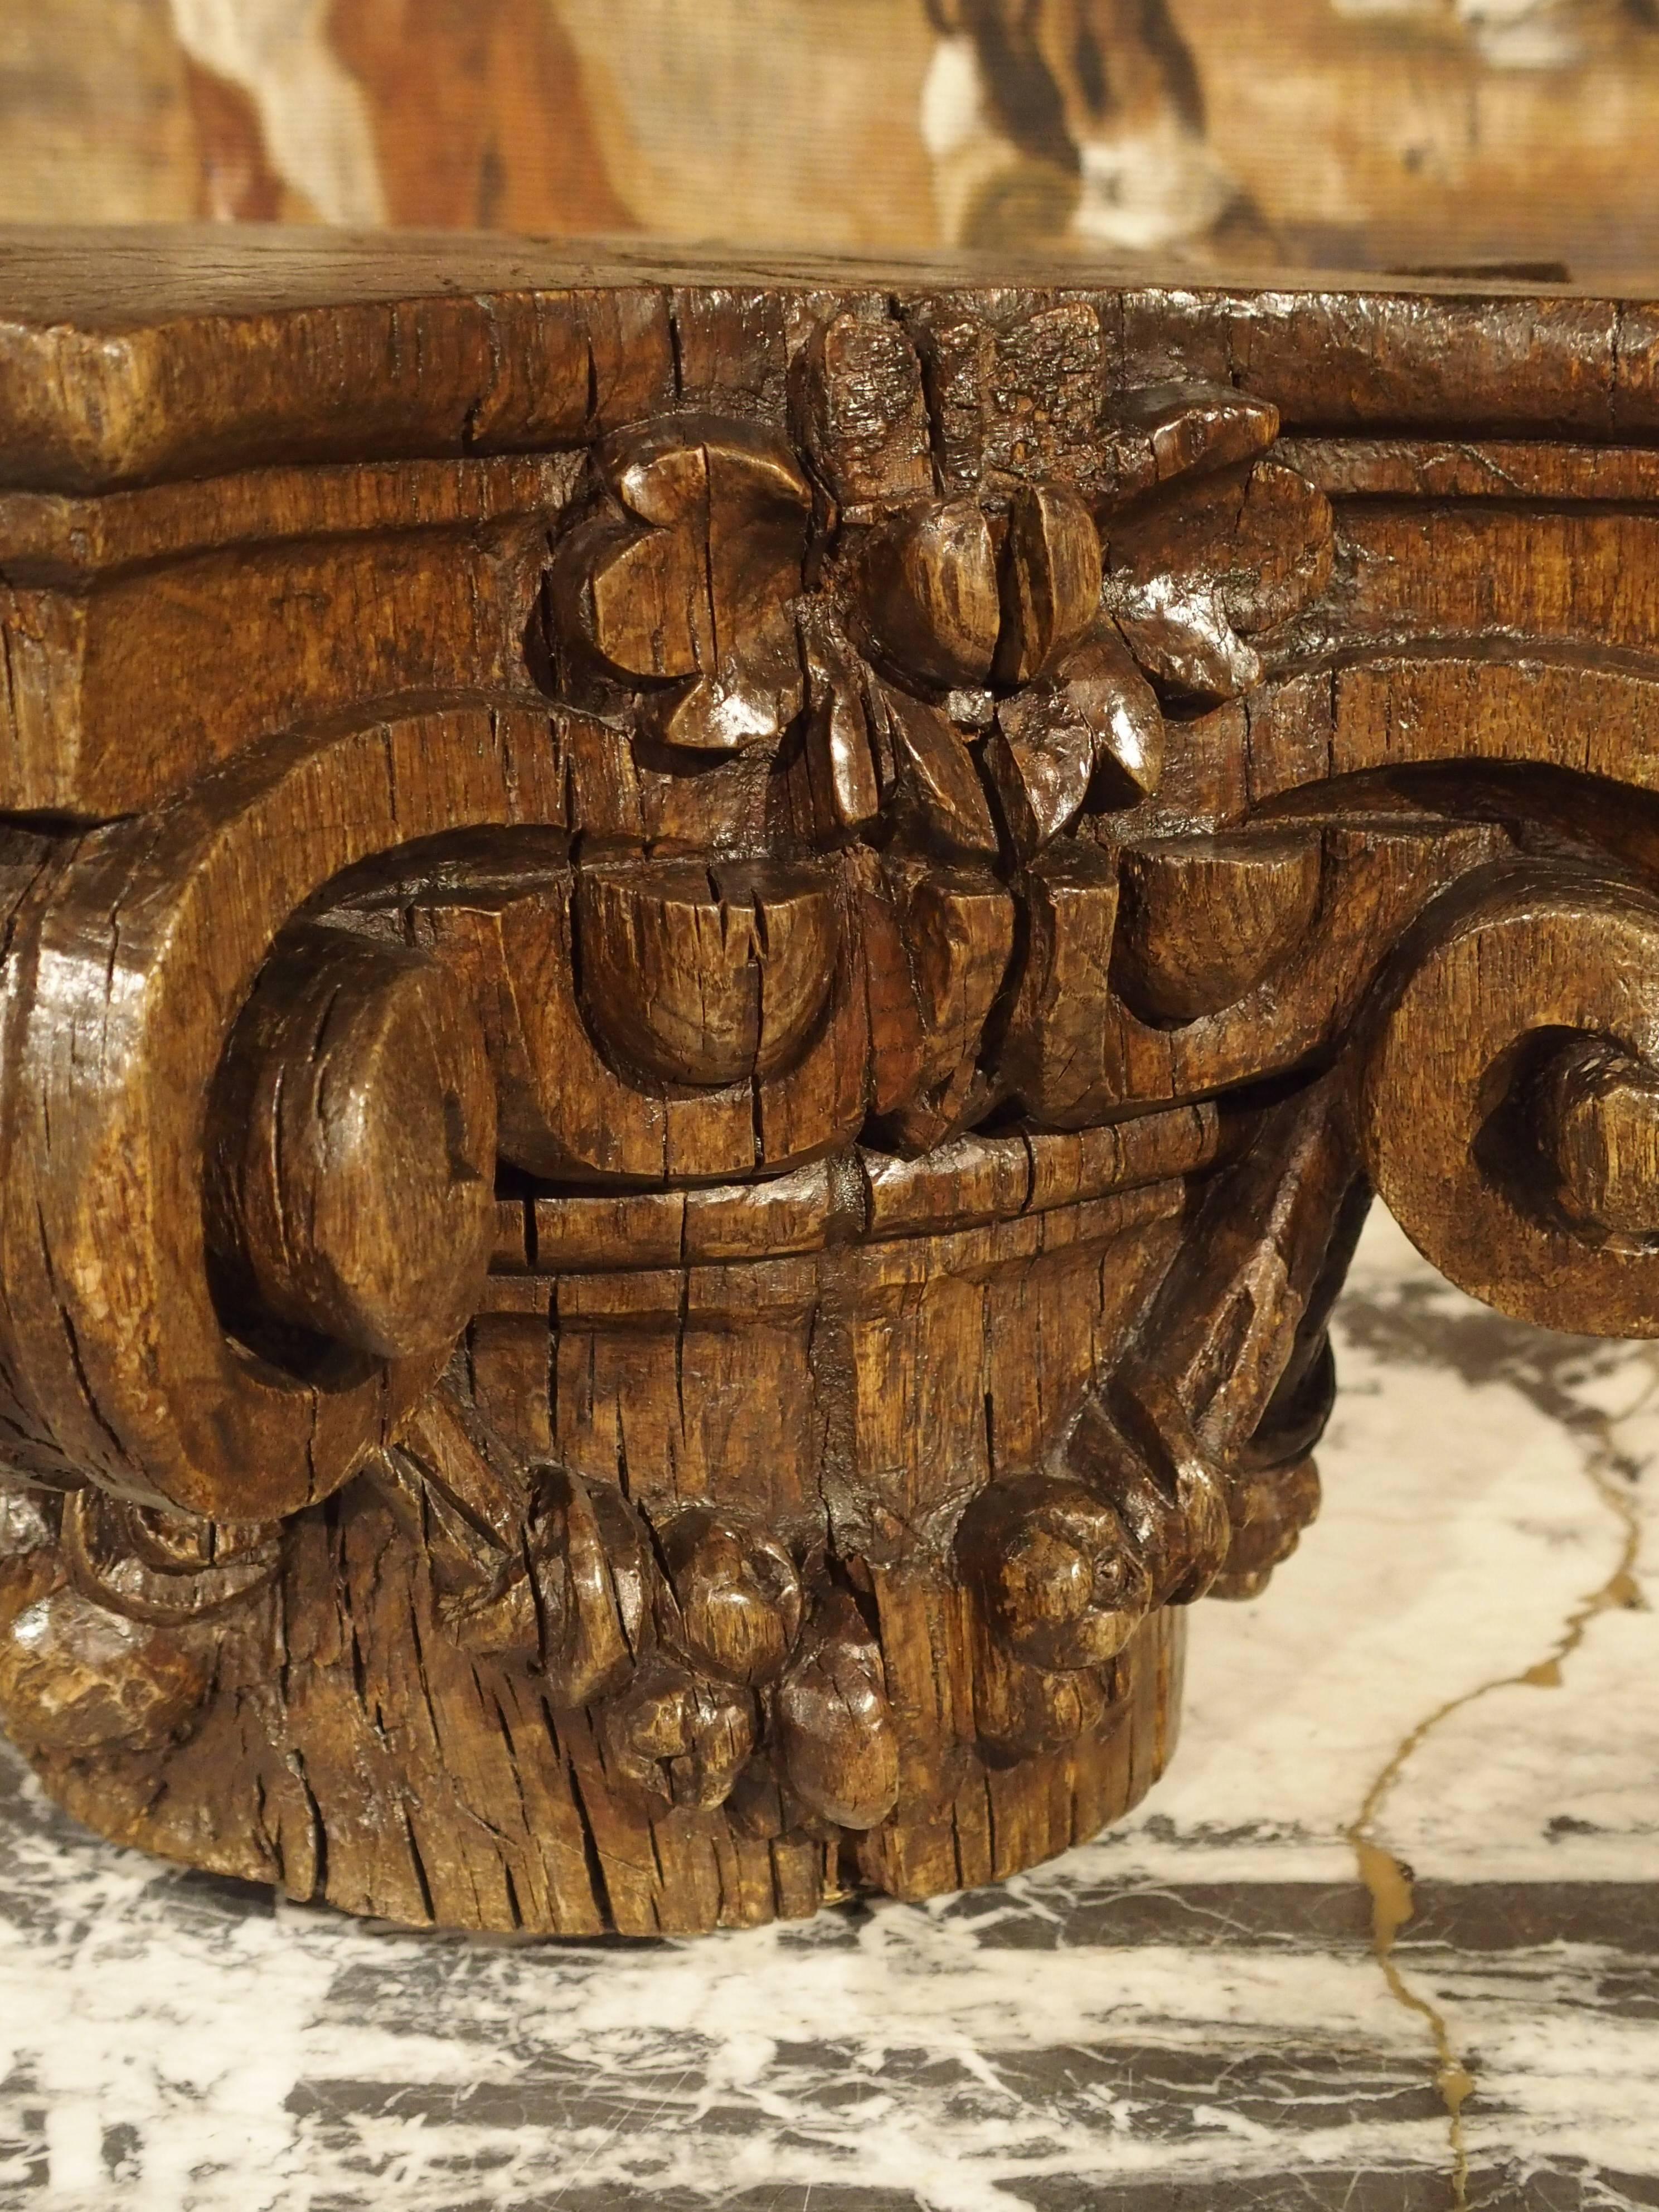 This French, hand-carved Ionic capital has been carved out of European Oak. The motifs are single flowers at the top center, stylized egg and flower, with garlands of fruit hanging from the scrolls on either side. This ornamentation is on three